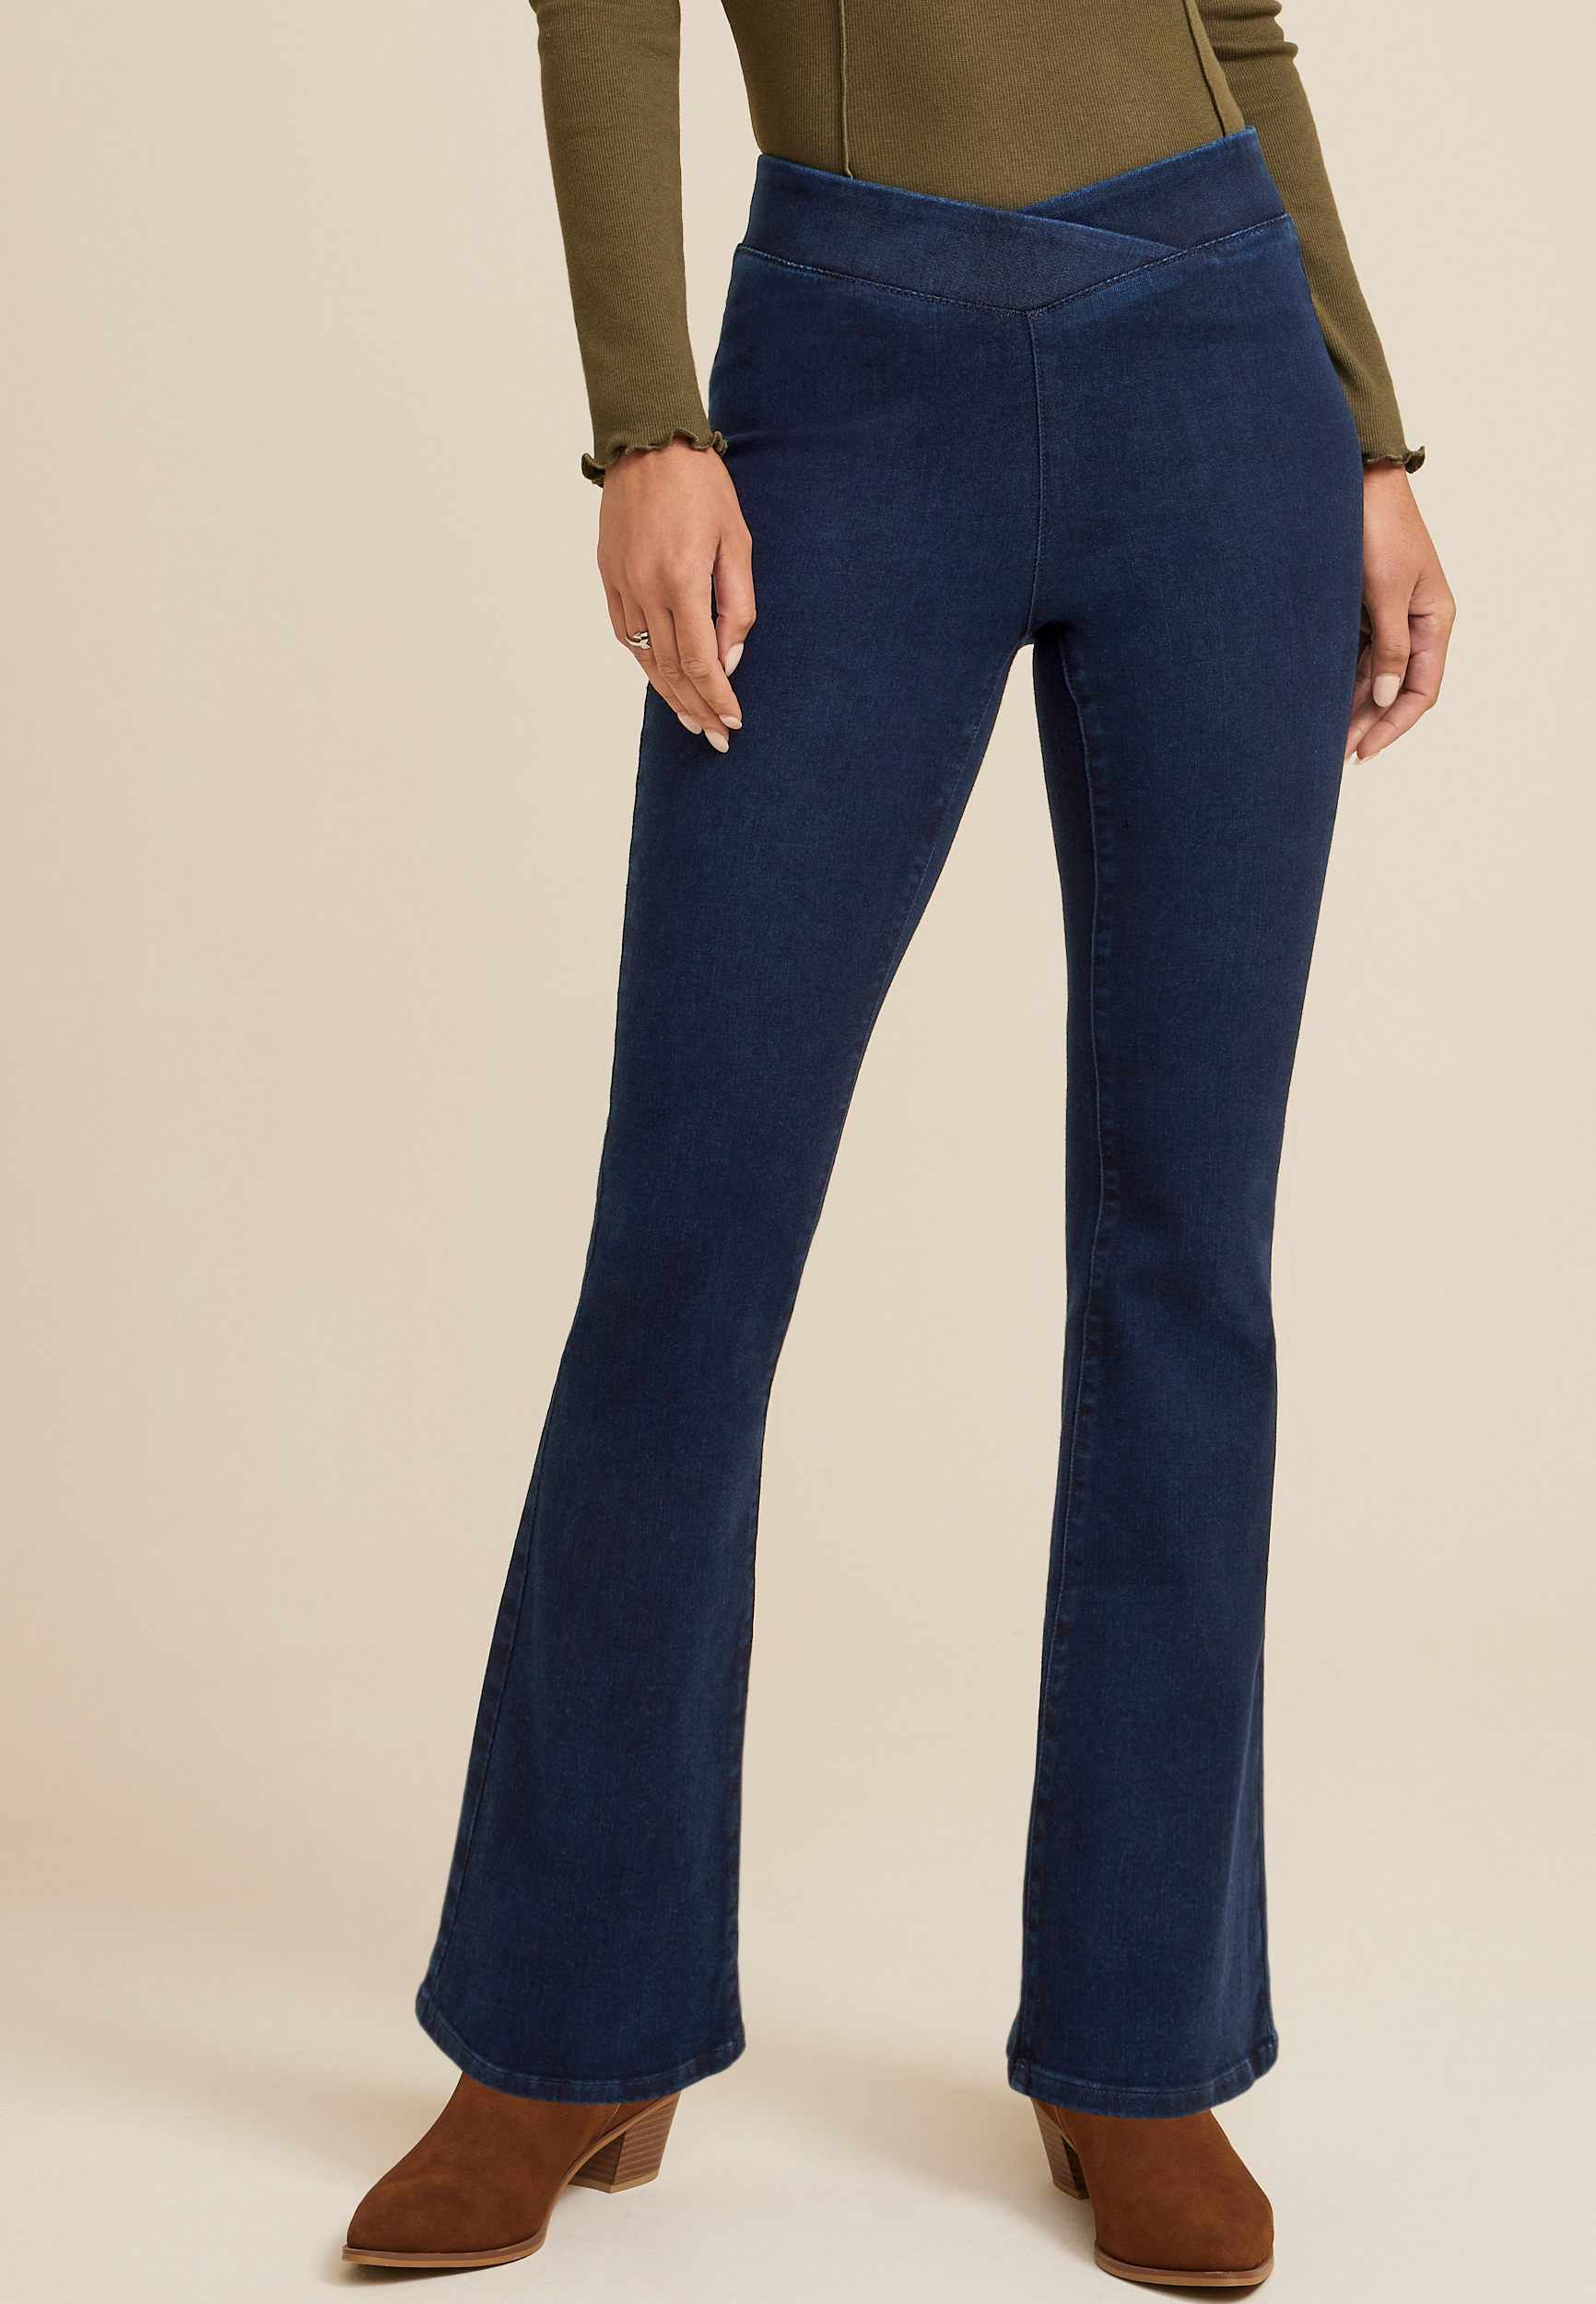 m jeans by maurices™ Sculptress High Rise Flare Jean